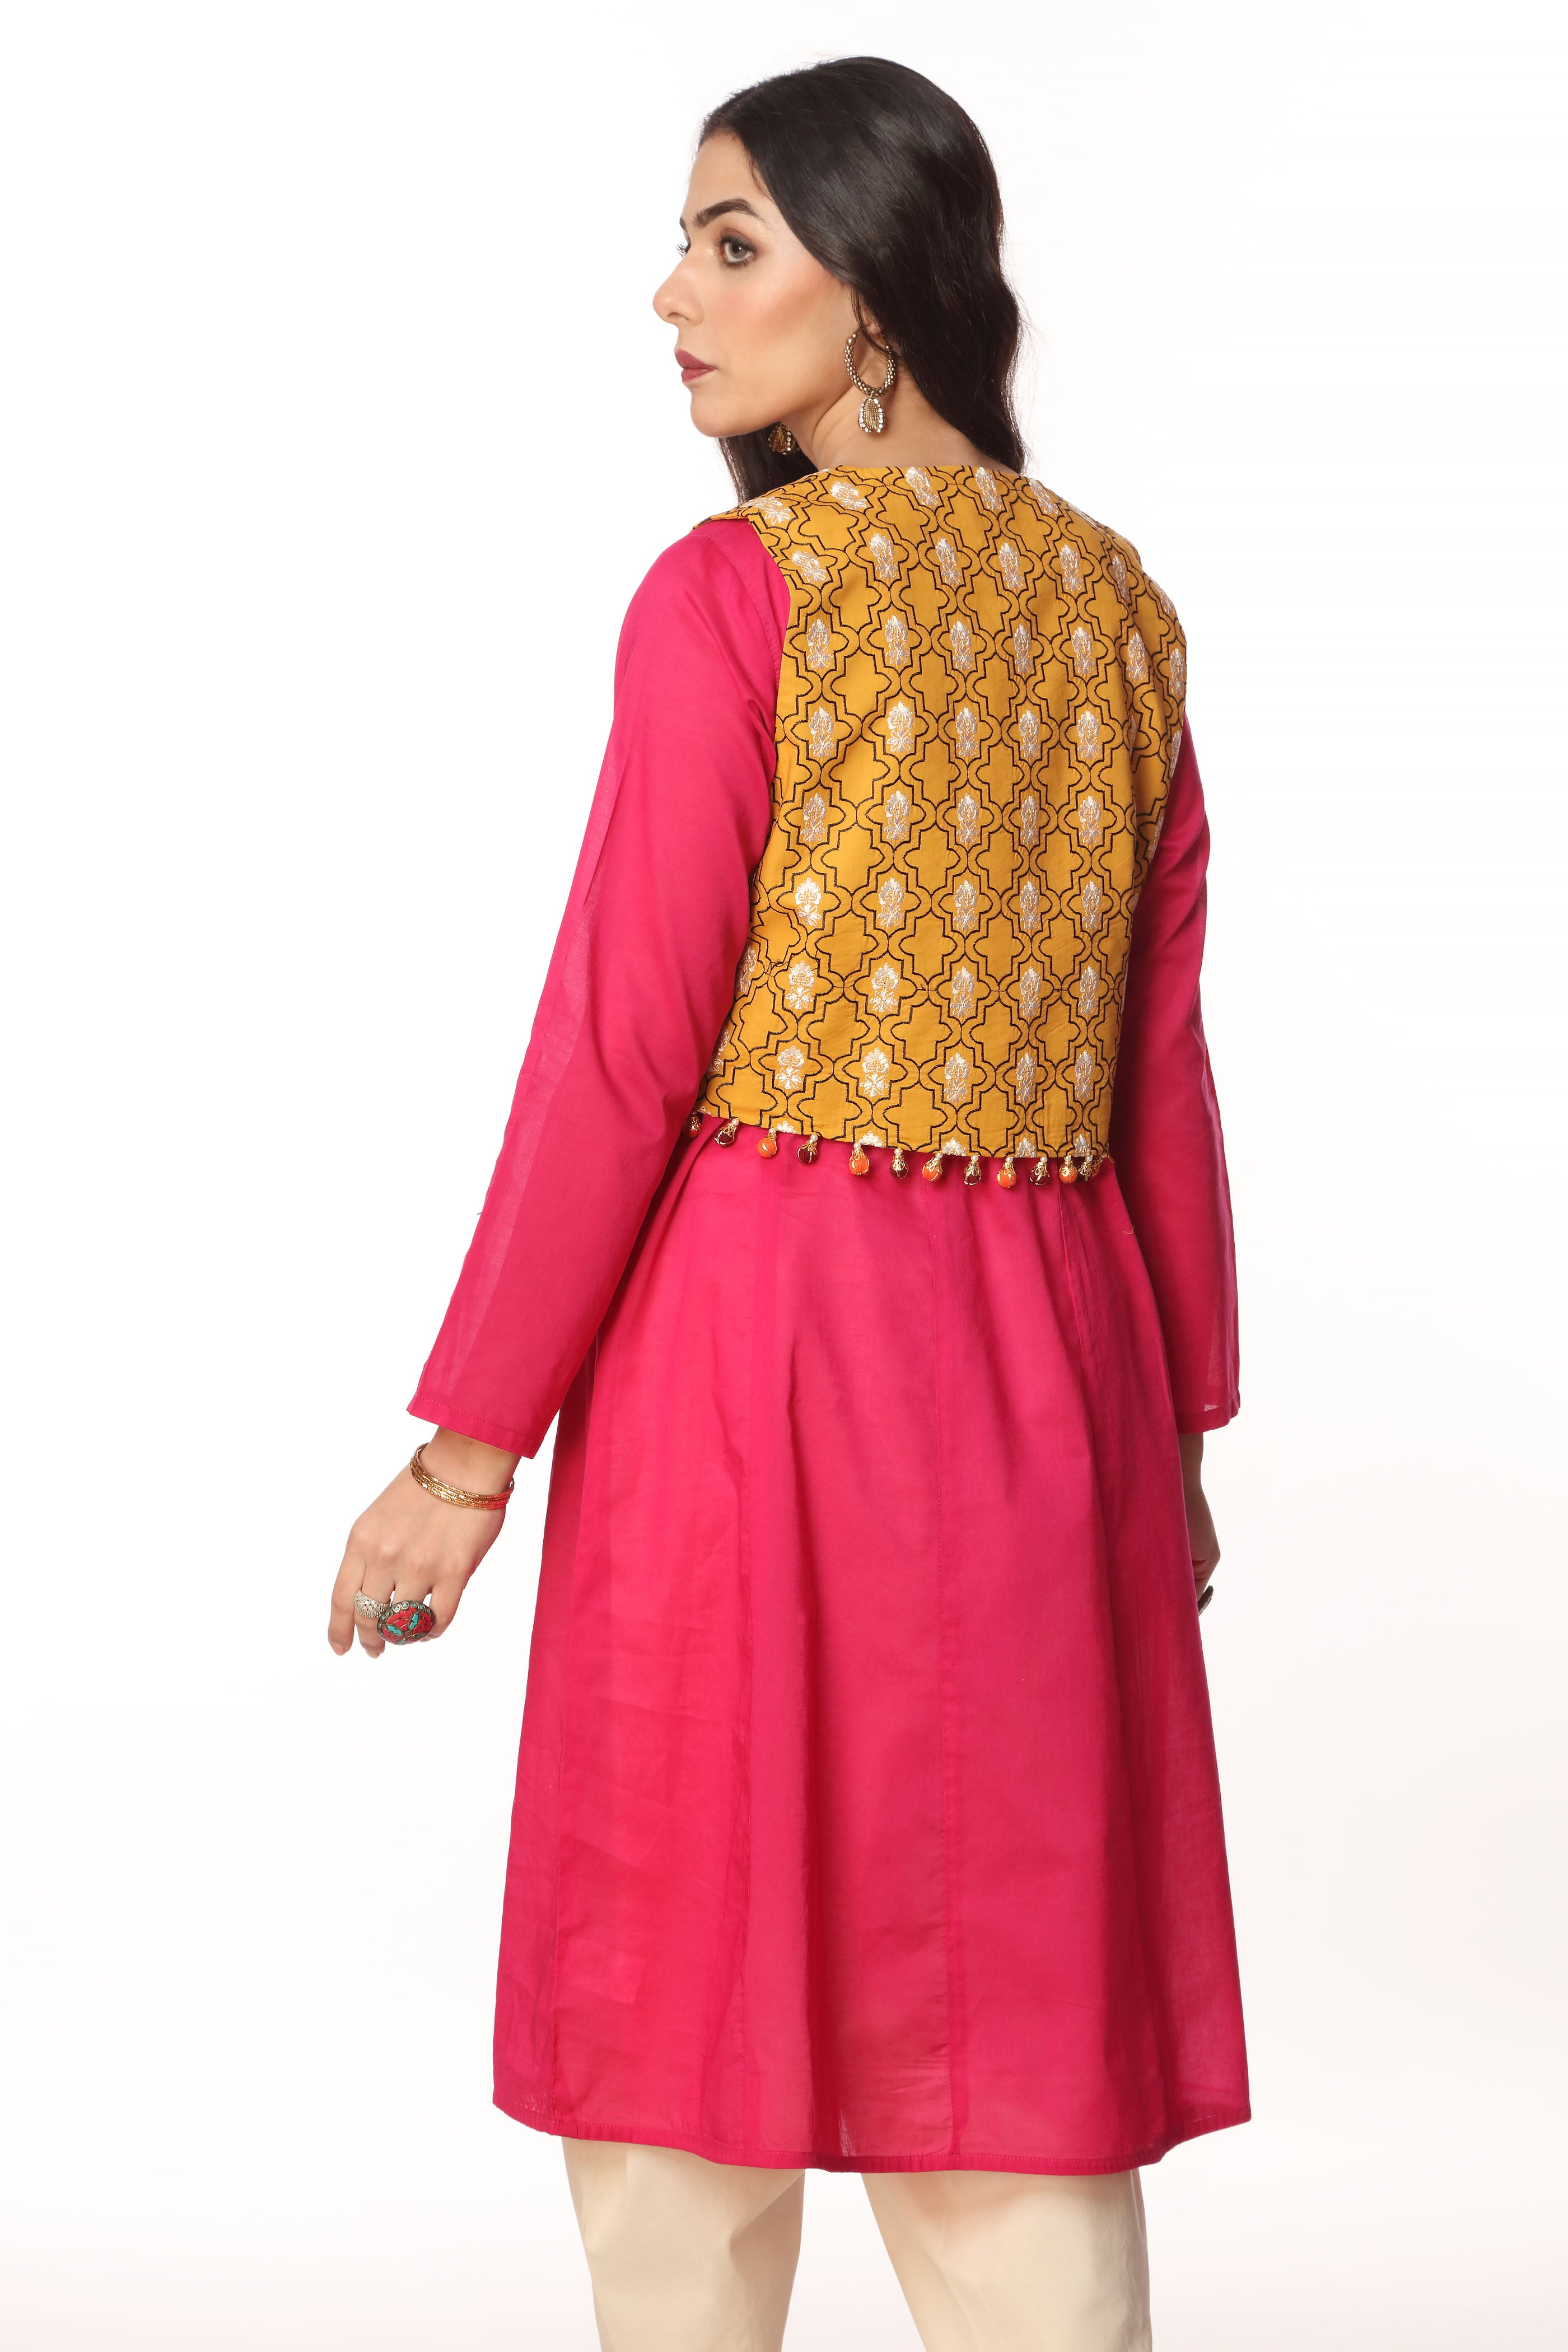 Black Grid 3 in Mustard coloured Printed Lawn fabric 3